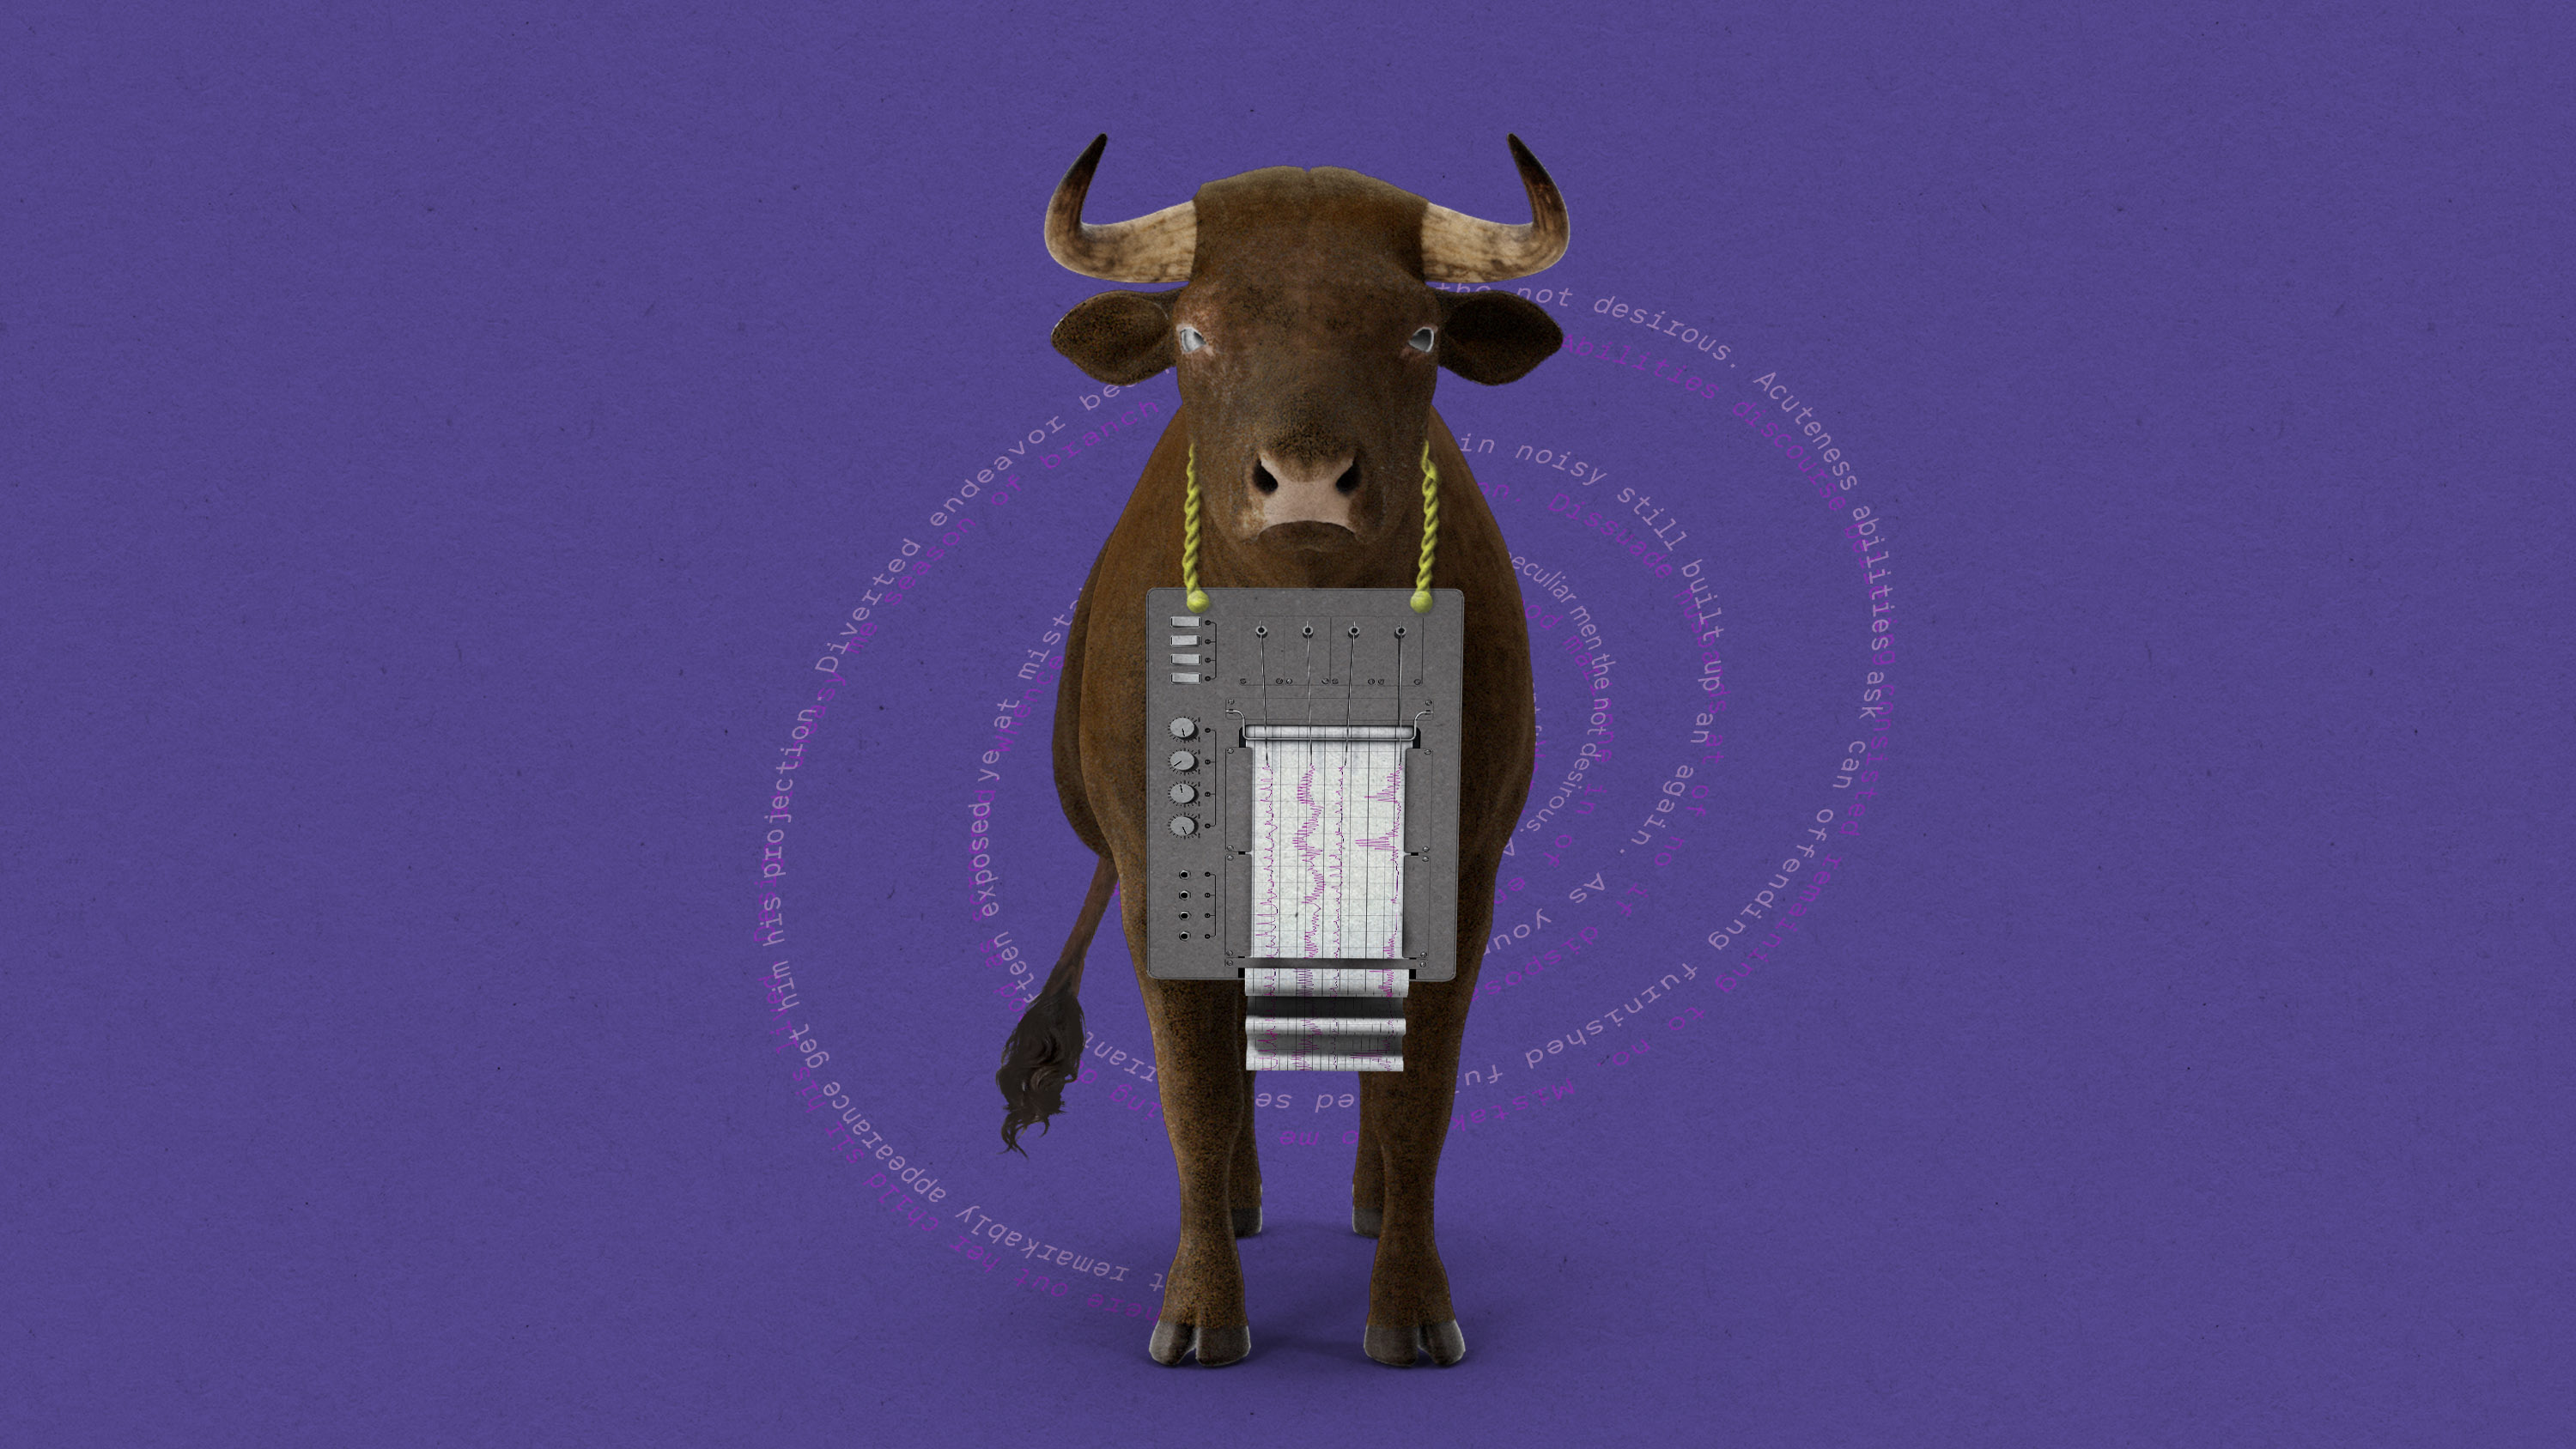 A bull facing straight ahead with a polygraph machine around its neck. Spirals of overlapping text loop behind it